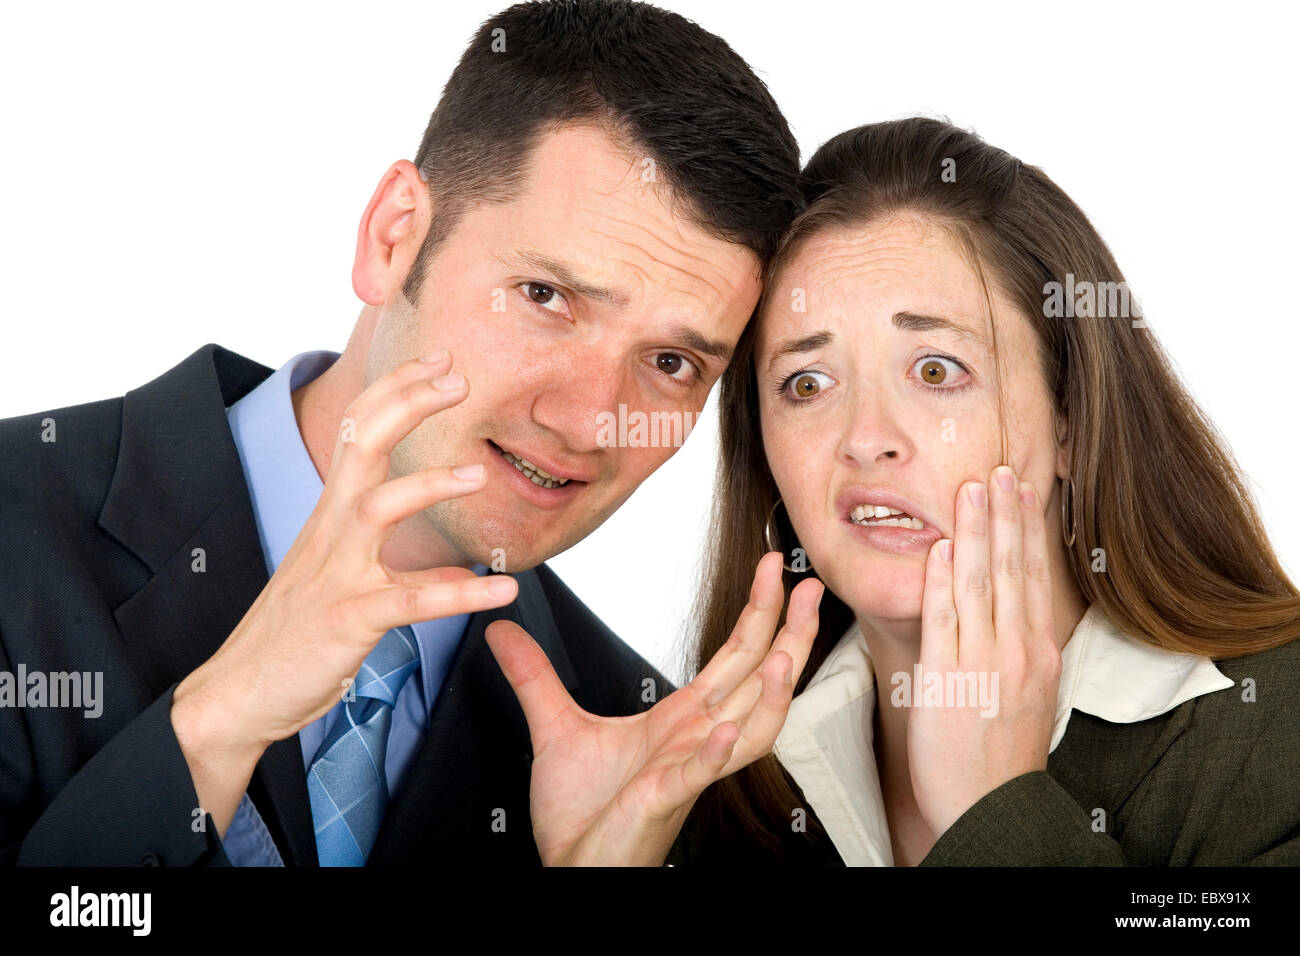 business partners looking very stressed Stock Photo